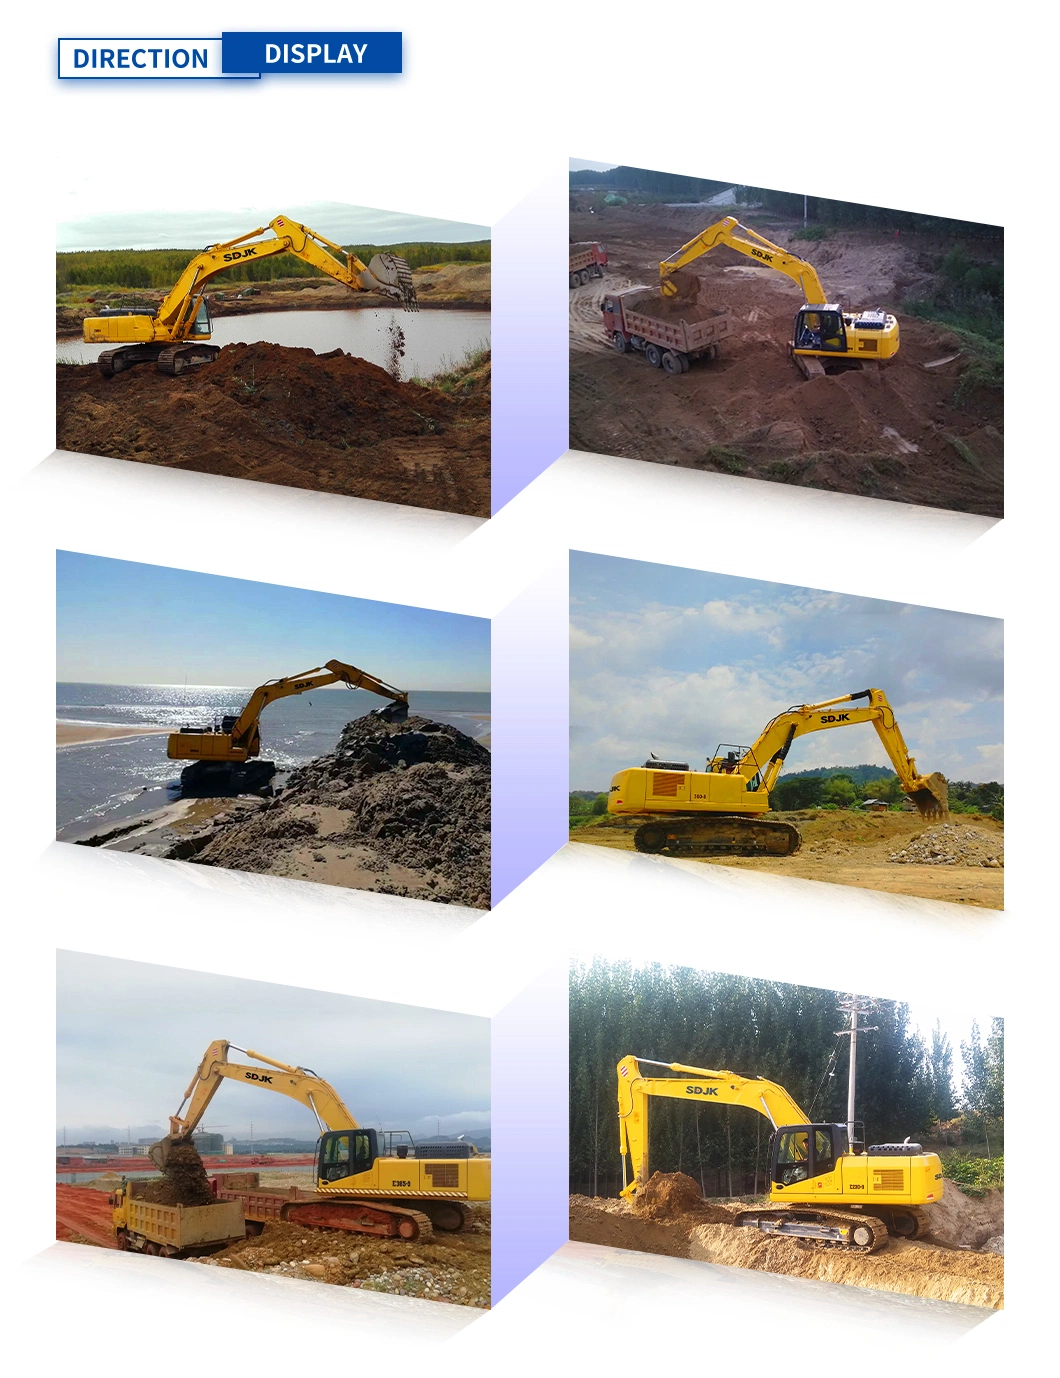 New Medium Excavator Machines with Cheap Prices for Sale 24 Ton